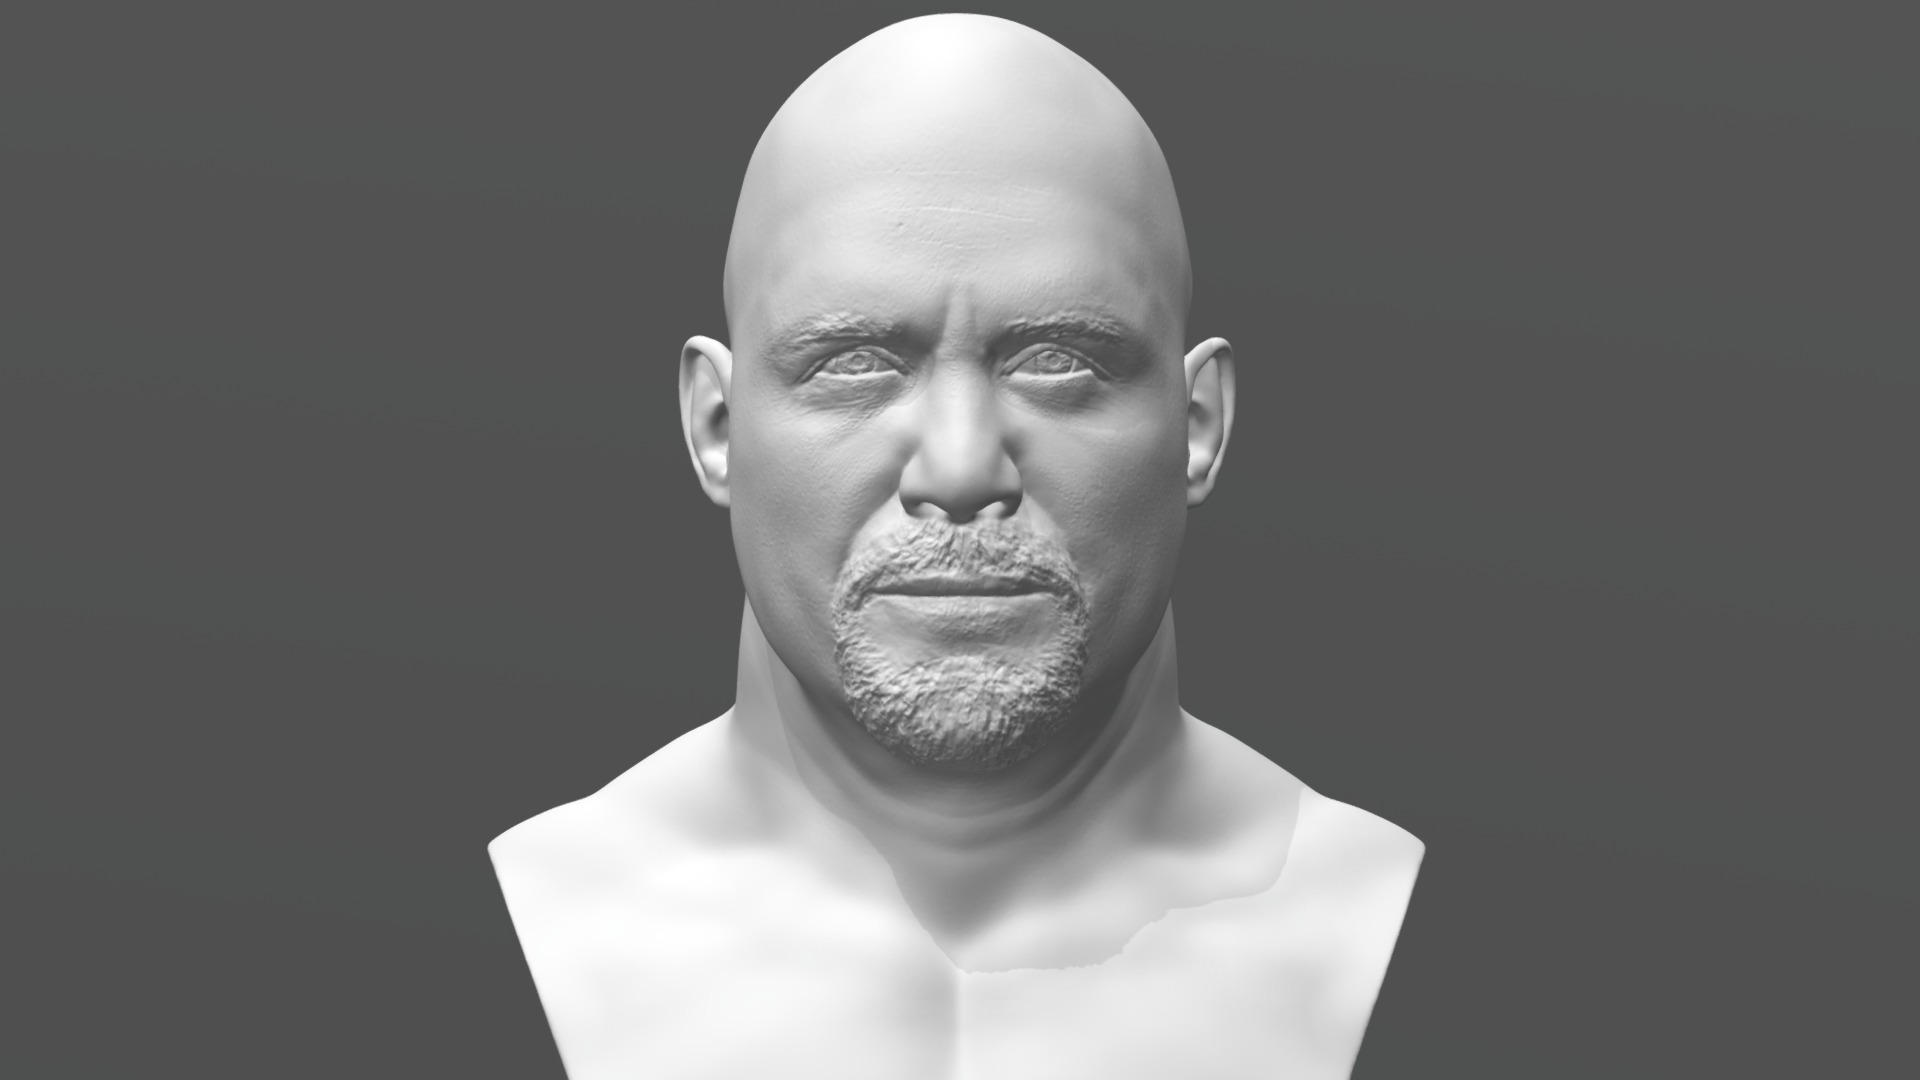 3D model Stone Cold bust for 3D printing - This is a 3D model of the Stone Cold bust for 3D printing. The 3D model is about a man with a white shirt.